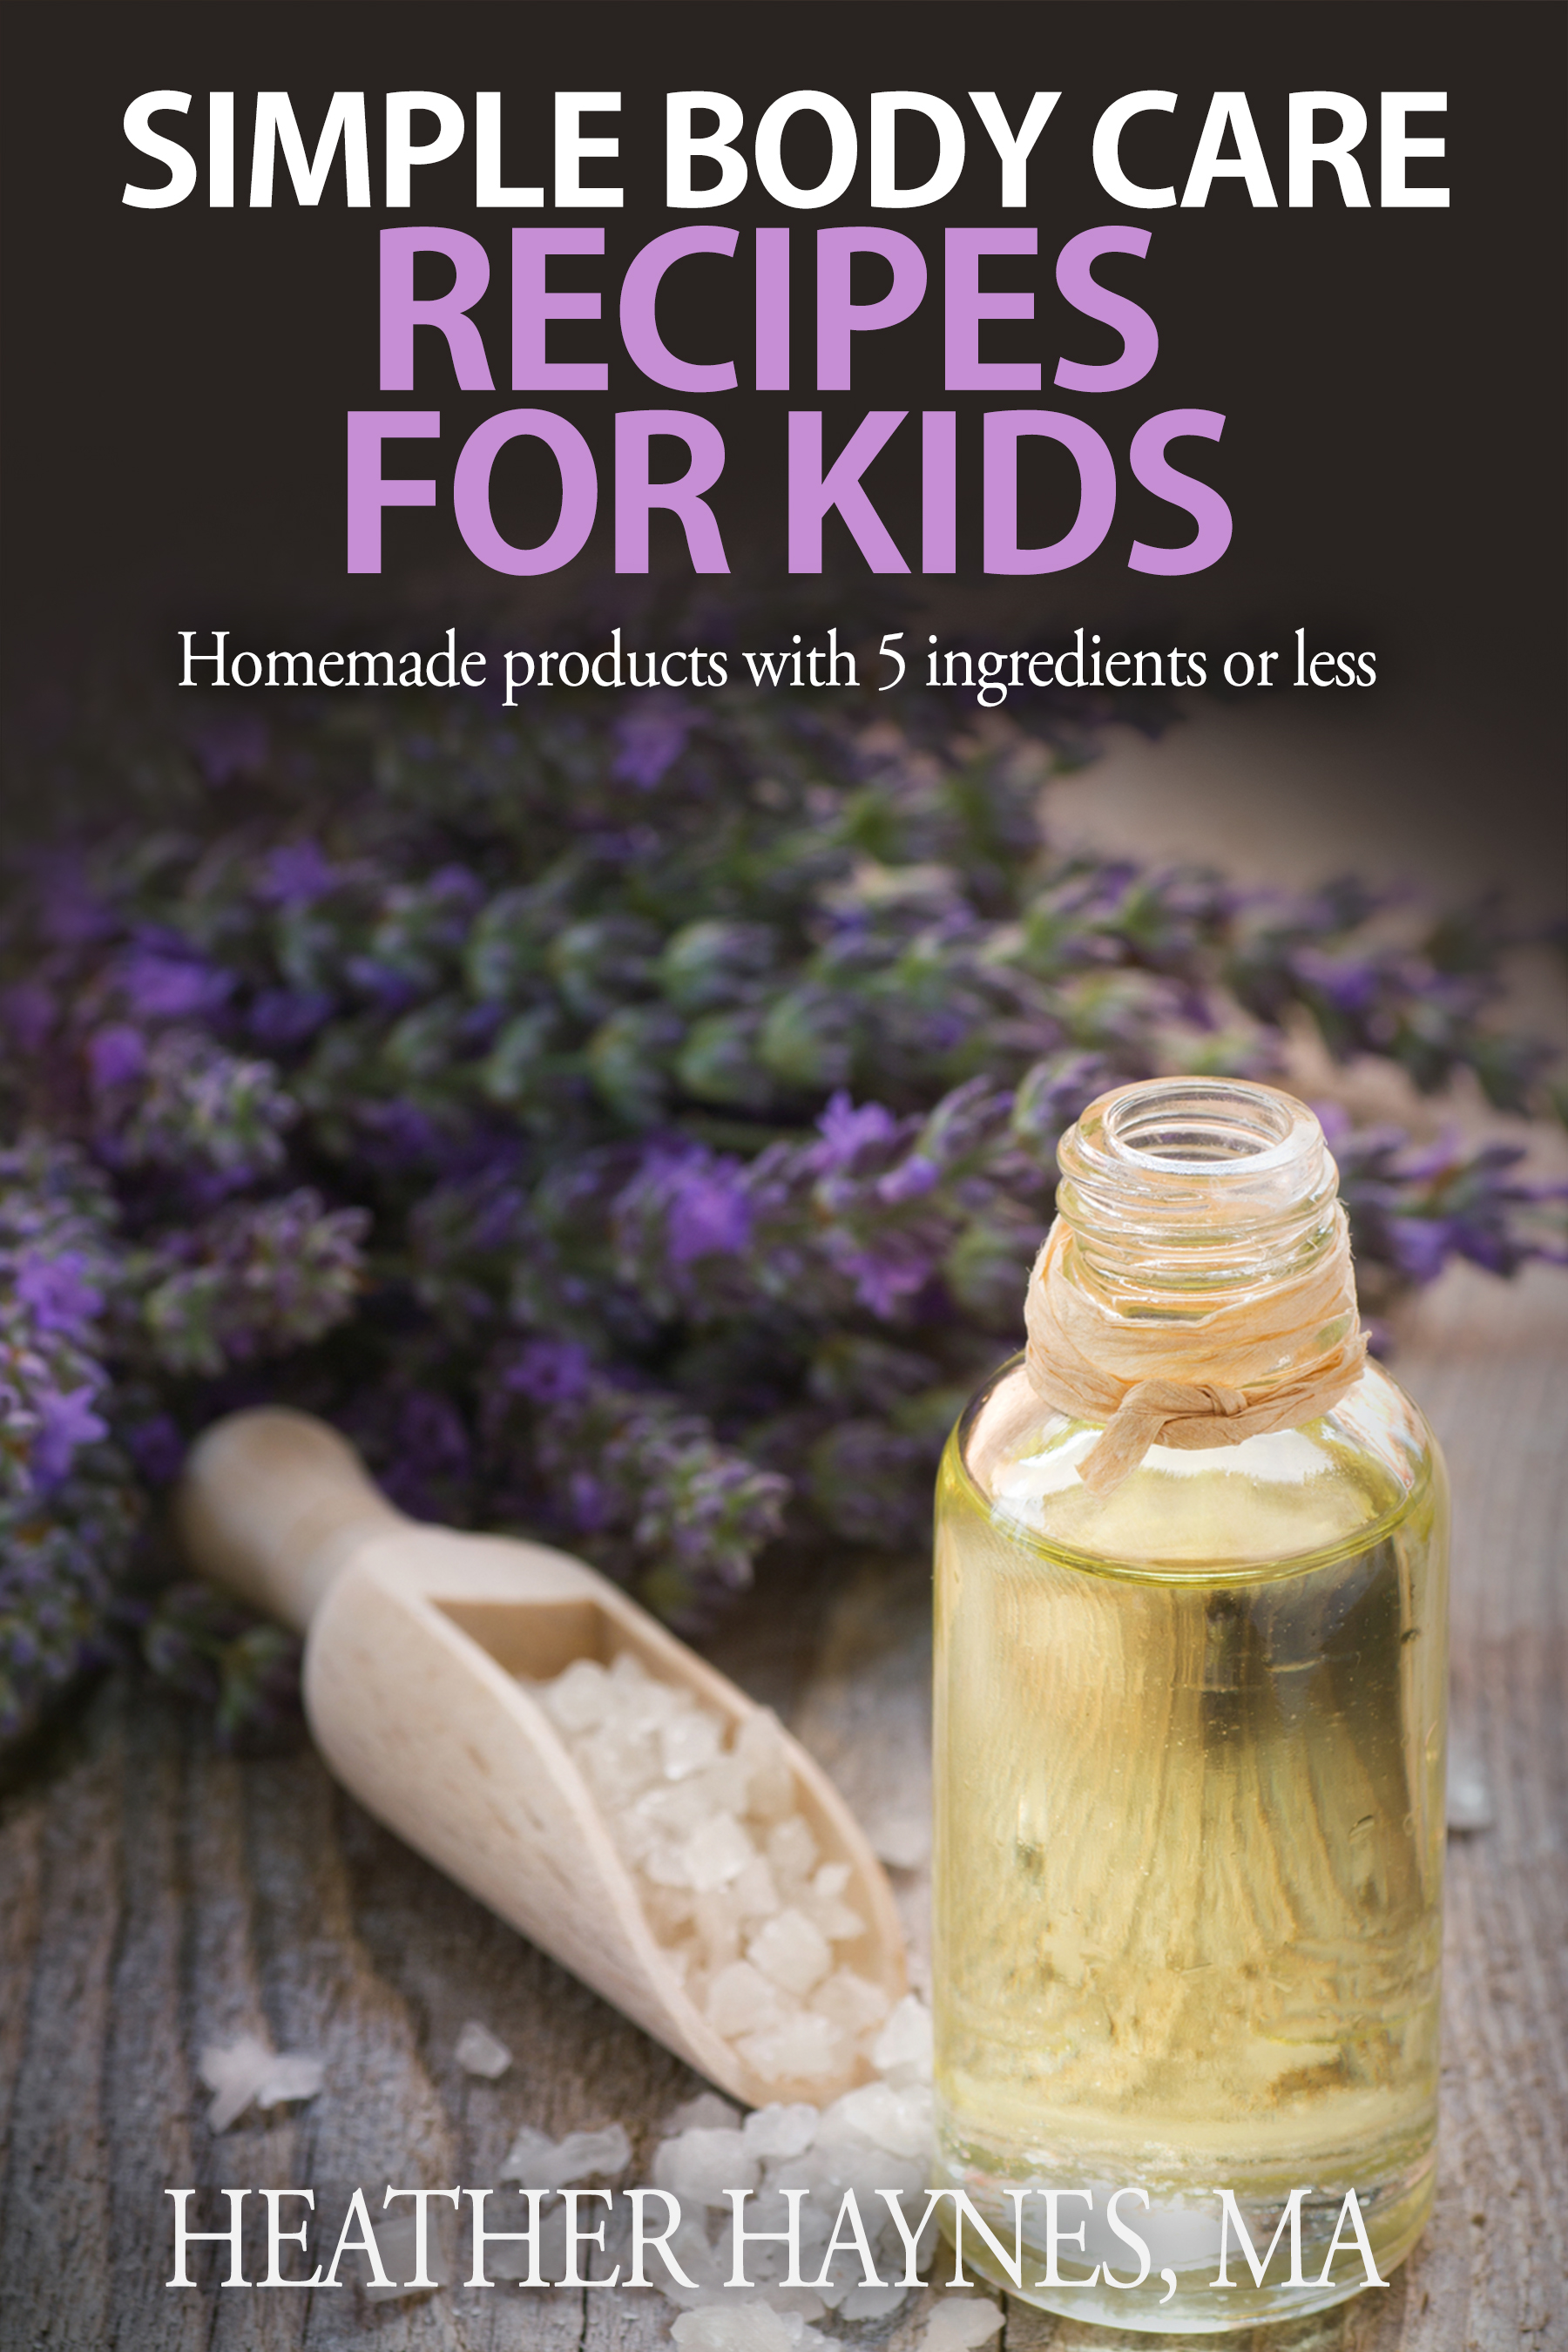 Simple Body Care Recipes for Kids